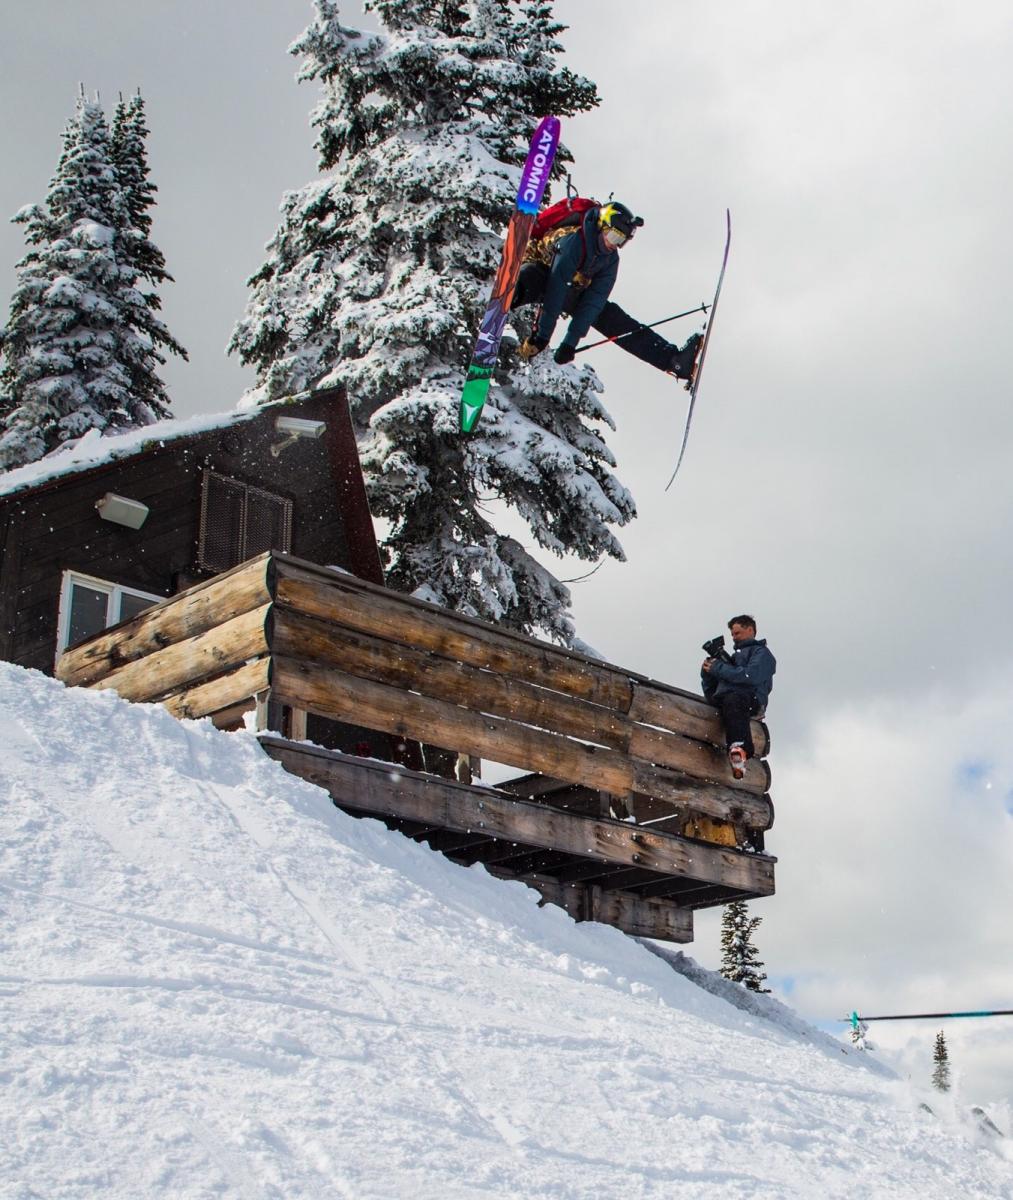 Sometimes you just have to jump off a building and throw down a good ol' Cossack. #hotdoggin #beyondthepowderhwy #rossland #explorebc #startshack #weareskiing Photo by @_ralphie_